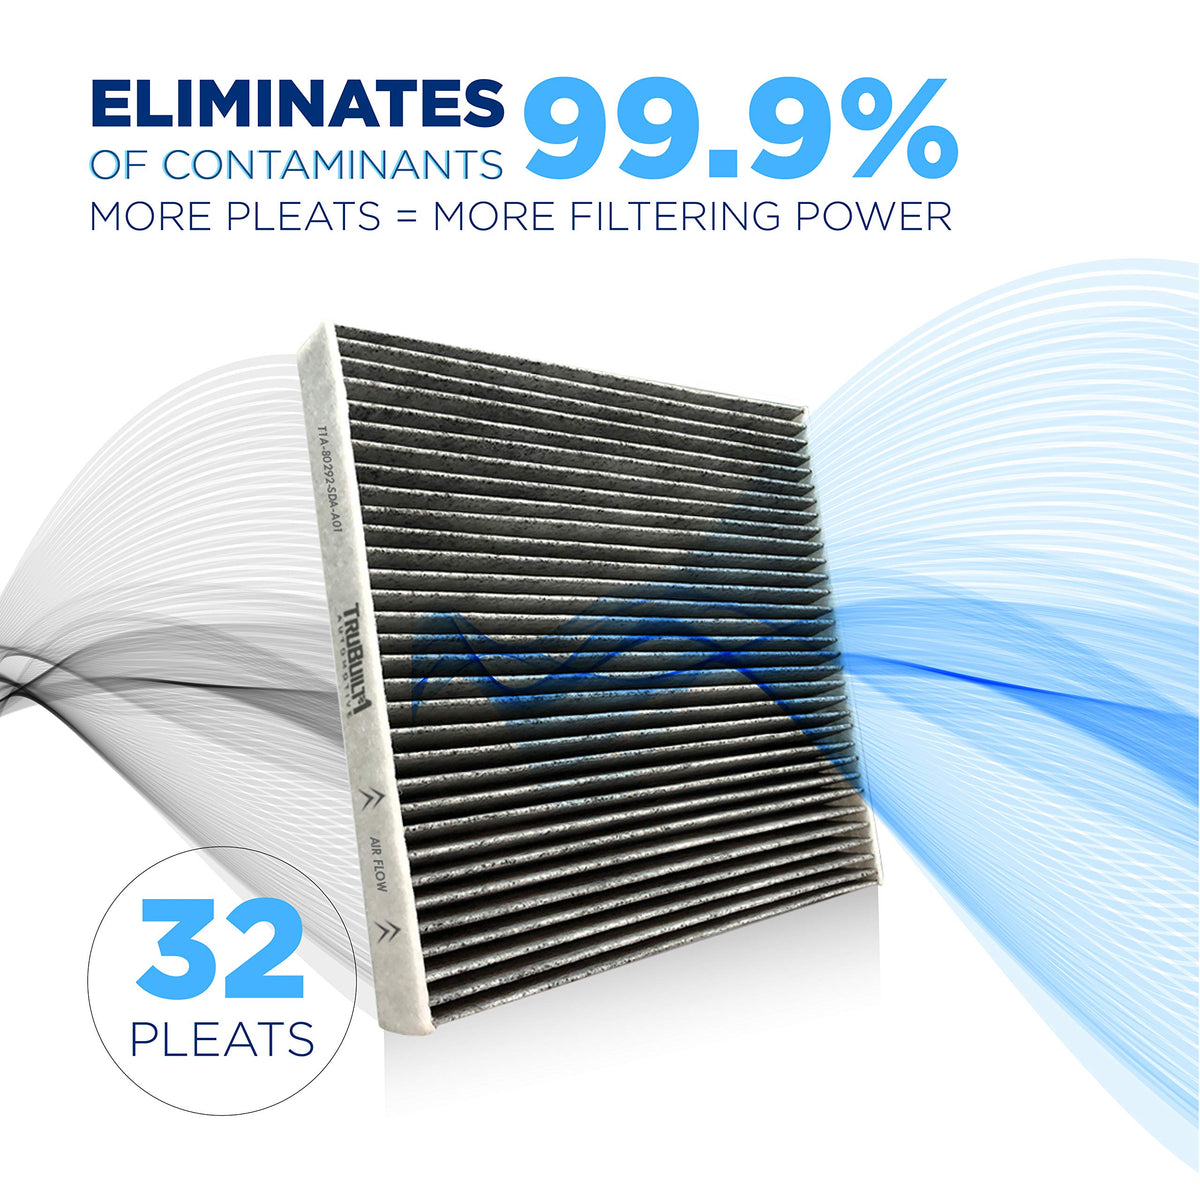 Cabin Air Filter - CP134 (CF10134) Replacement Includes Activated Carbon | Fits for Honda & Acura | Fresh Breeze Pure Premium Air Filters by T1A